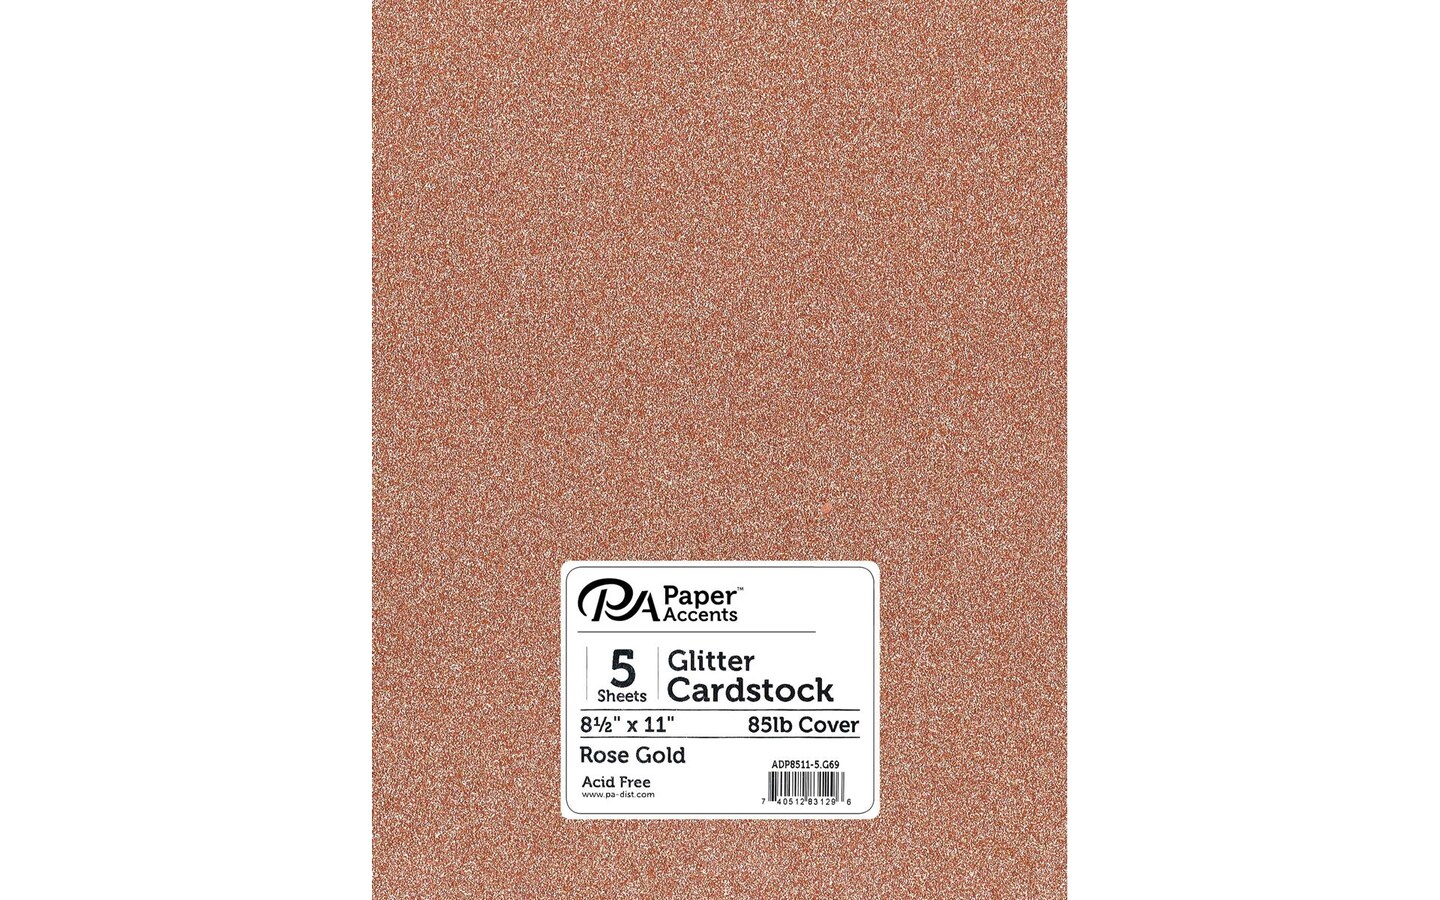 PA Paper Accents Glitter Cardstock 8.5&#x22; x 11&#x22; Rose Gold, 85lb colored cardstock paper for card making, scrapbooking, printing, quilling and crafts, 5 piece pack